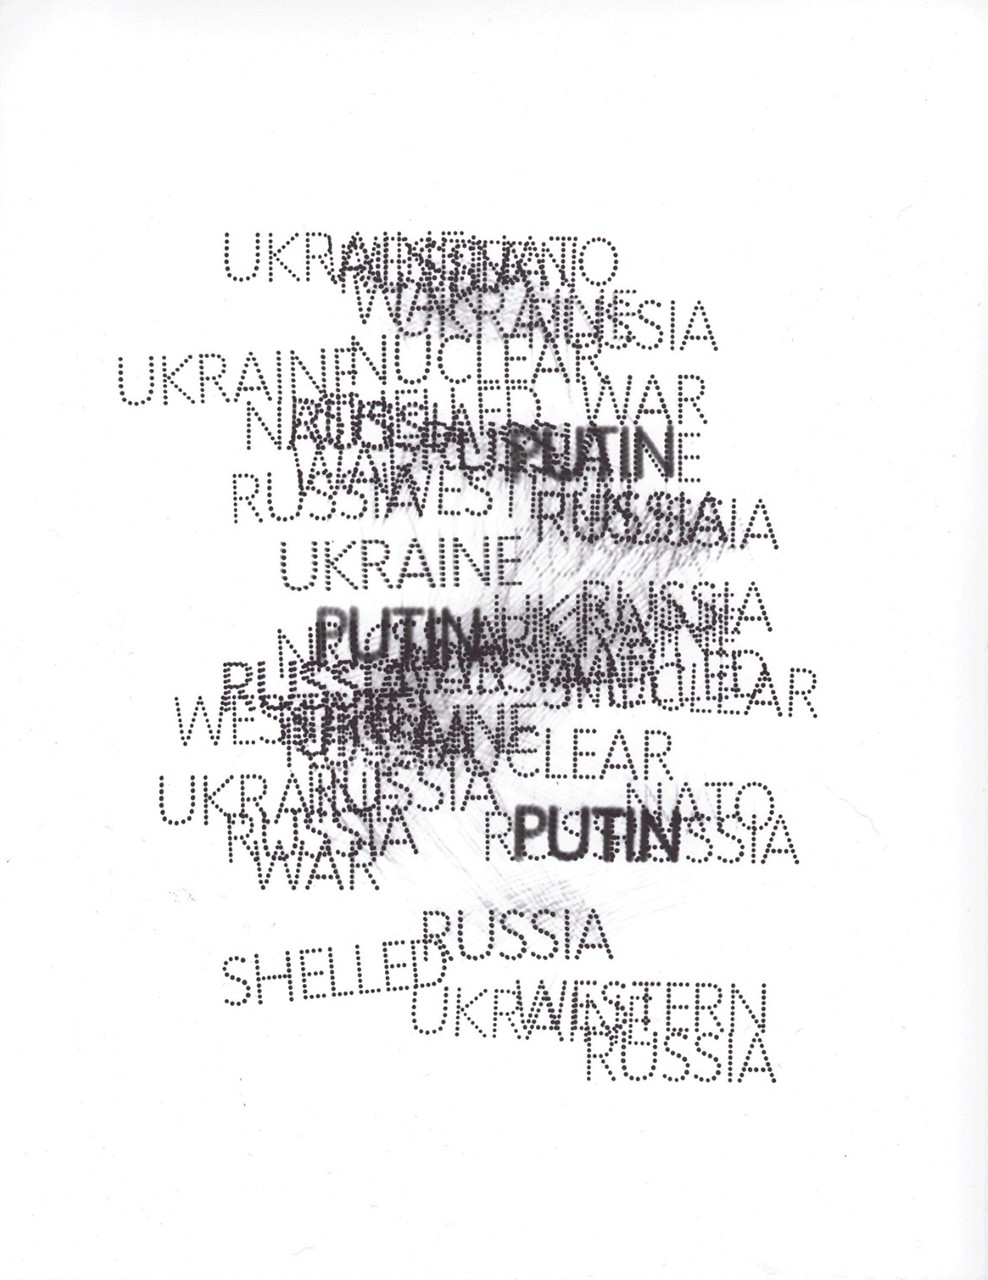 text artwork made of a cluster of black words on white background, all slightly out of line and densely overlaid in the cerntre. the words read: UKRAINE, RUSSIA, WAR, SHELLED, PUTIN